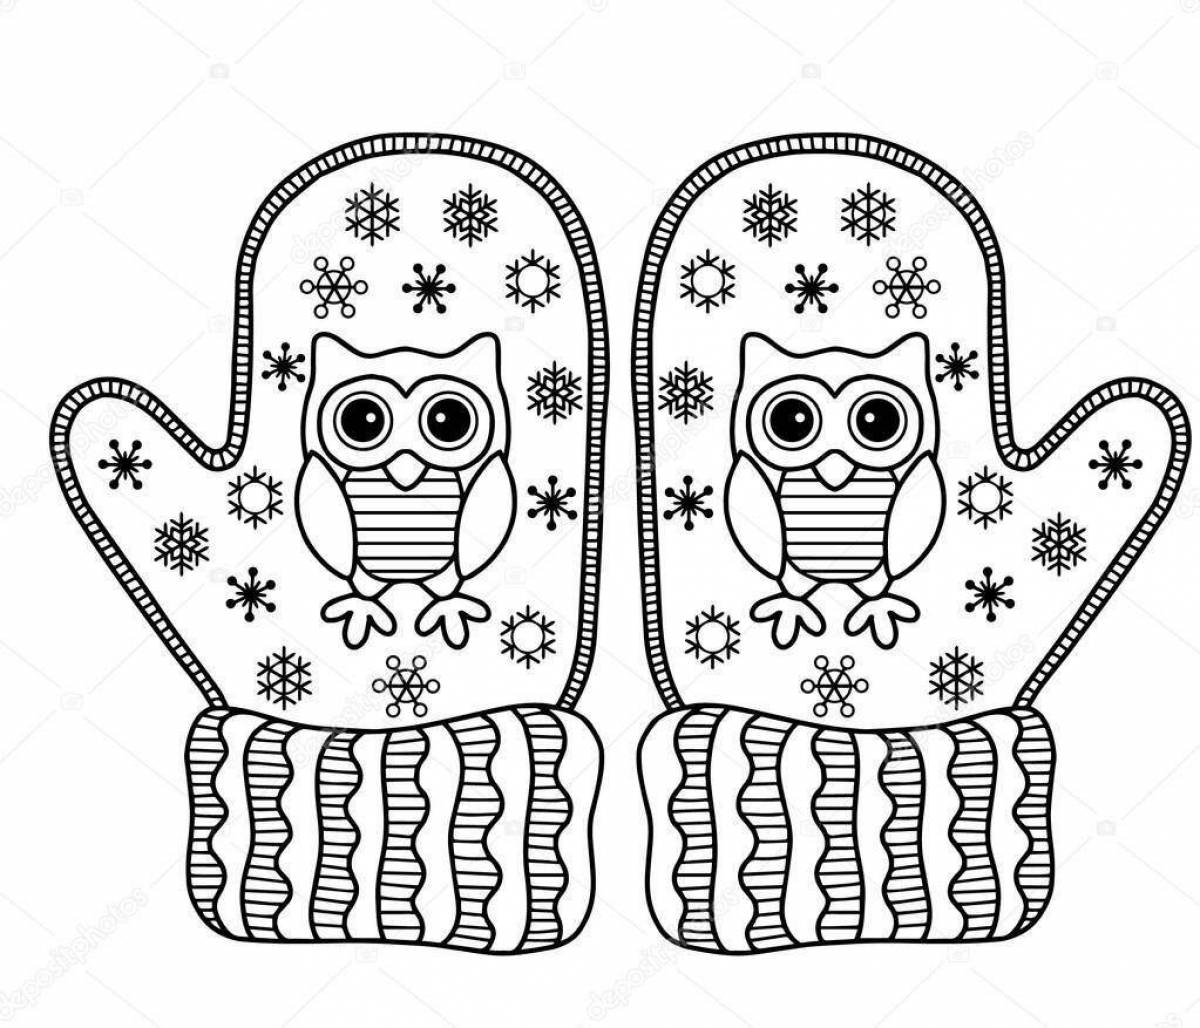 Living outline of the mittens